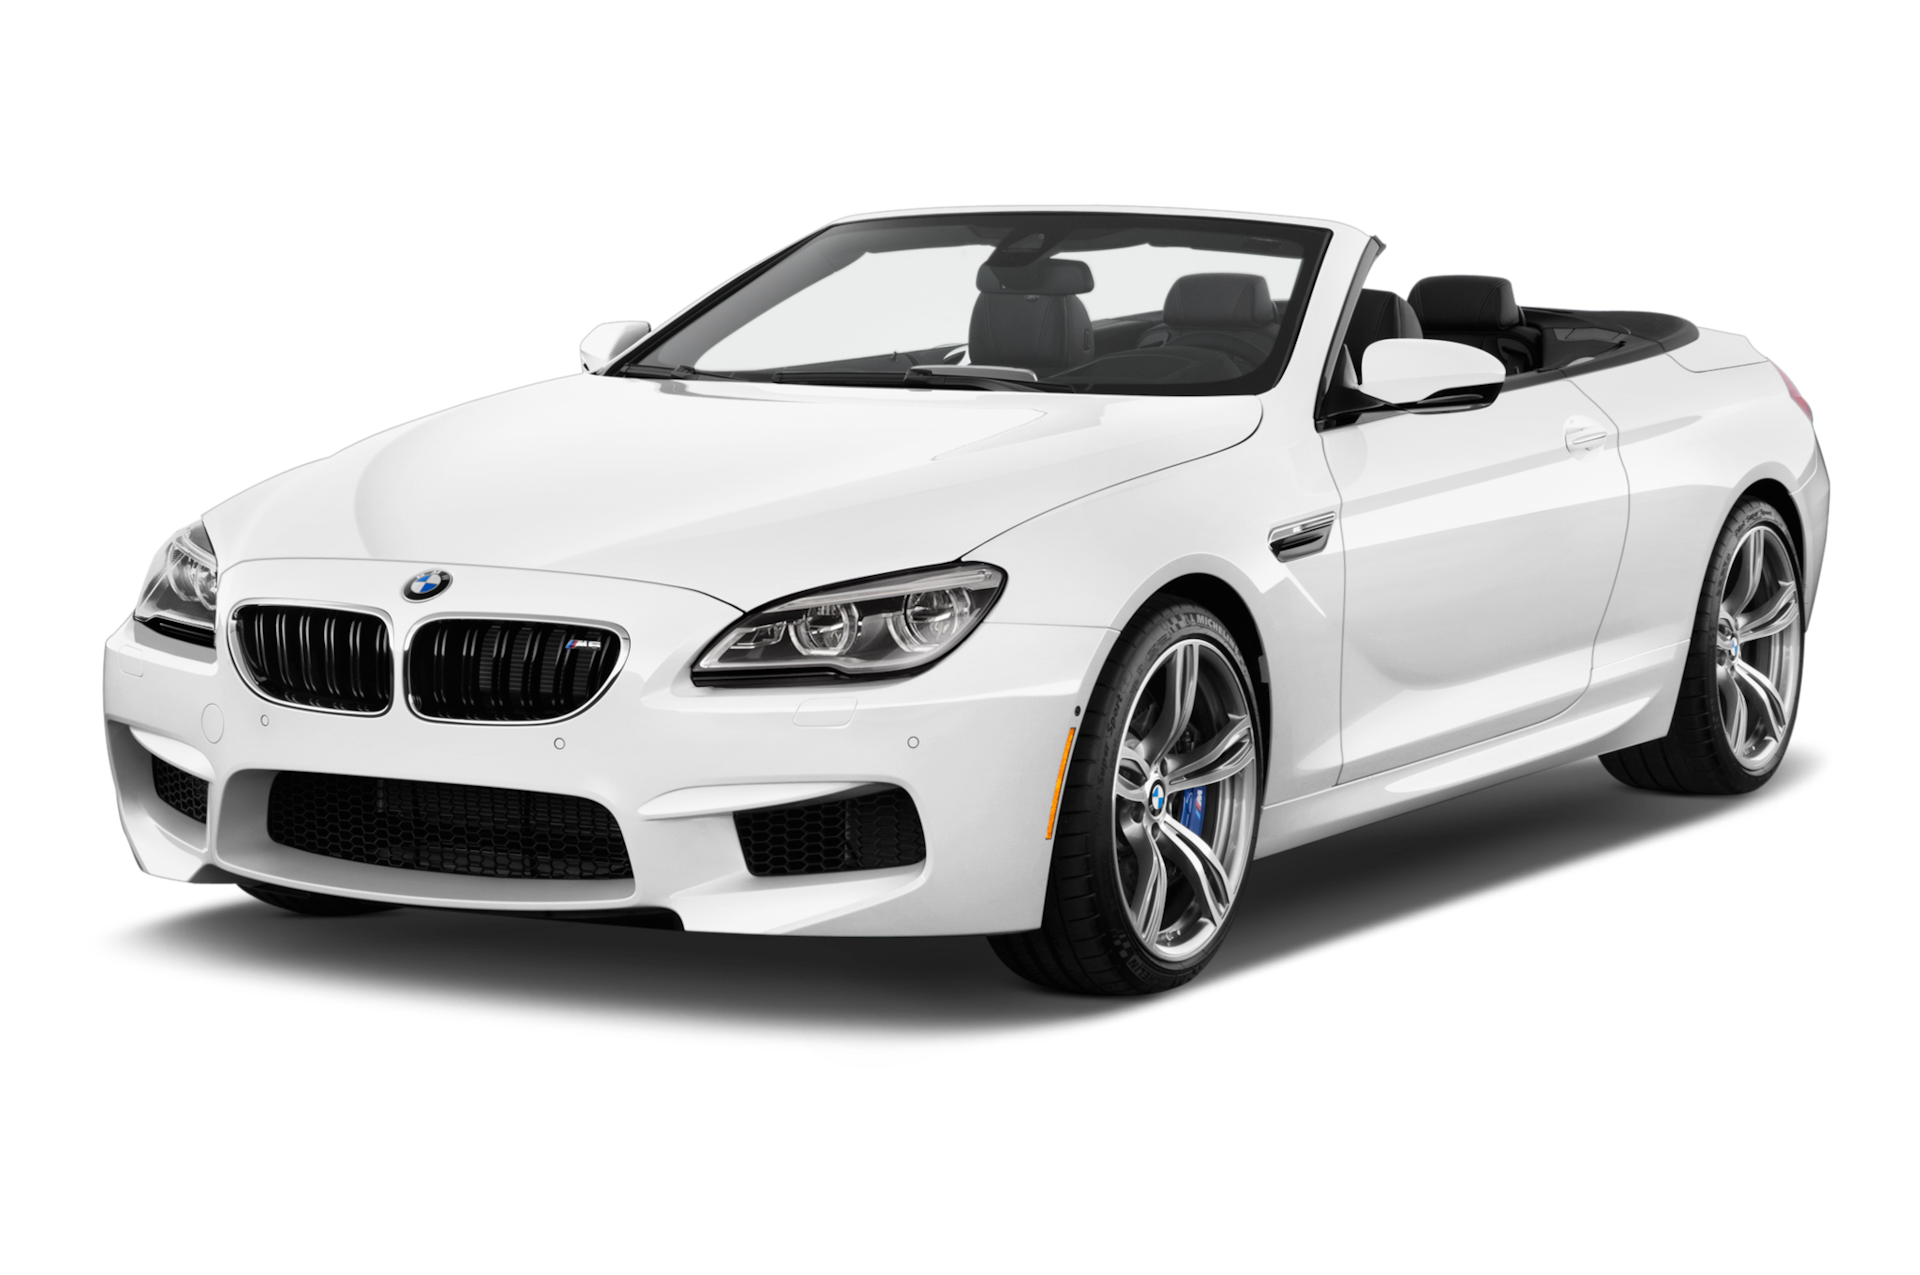 2018 BMW M6 Prices, Reviews, and Photos - MotorTrend